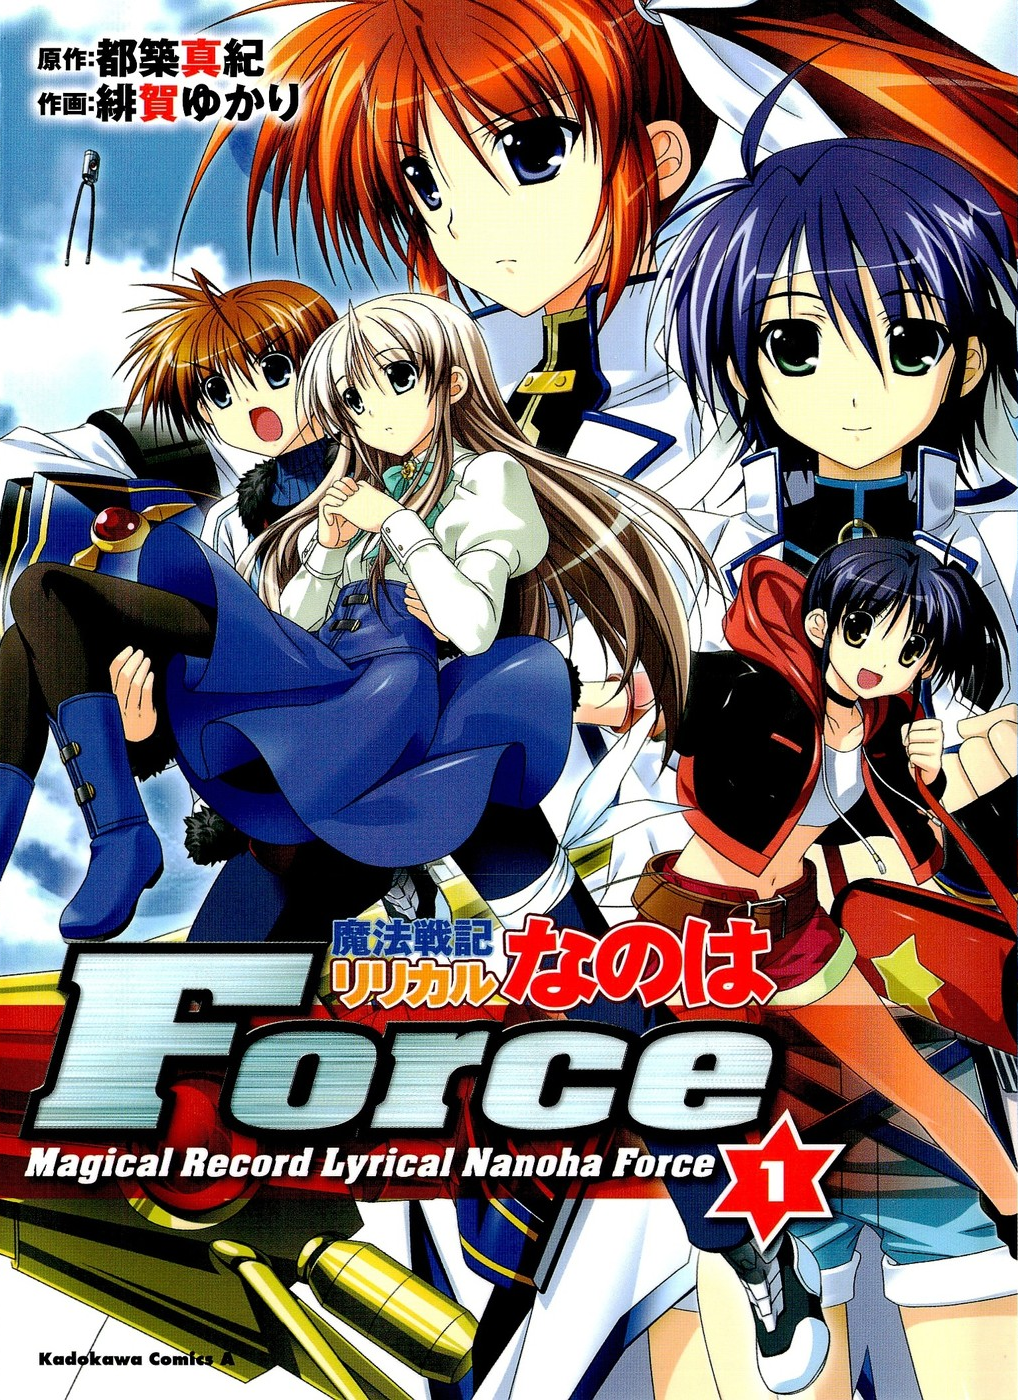 Amazing Magical Record Lyrical Nanoha Force Pictures & Backgrounds